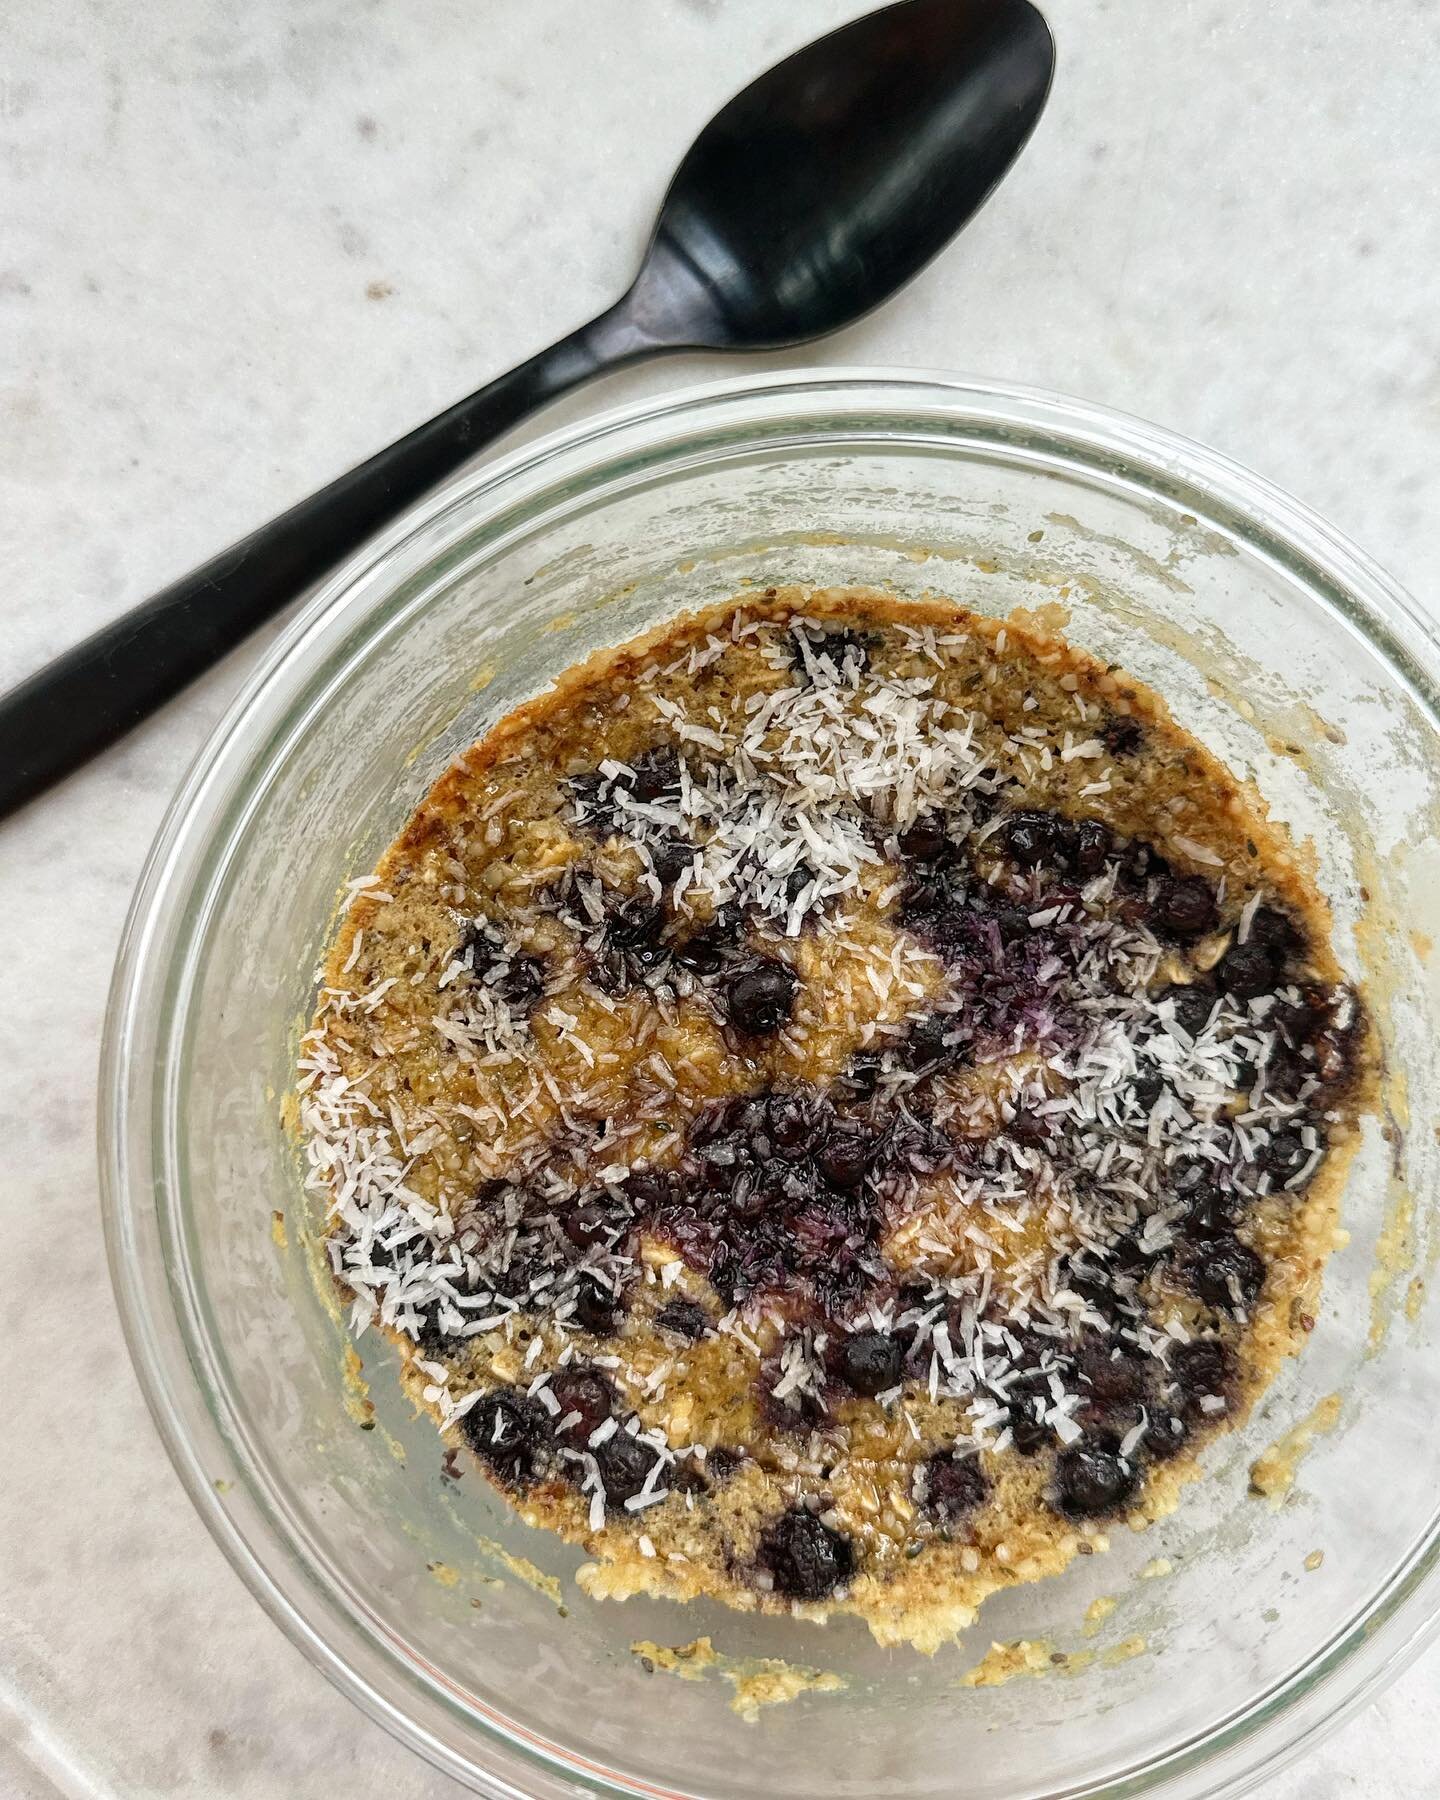 My breakfast on repeat these days! 

Let&rsquo;s call it a high protein breakfast oatmeal mug cake🤷🏻&zwj;♀️&hellip;. aka the ultimate Treesh cake 💥 

This meal is loaded with omega 3s, iron and fiber! 12g to be exact. 
It&rsquo;s the perfect recip